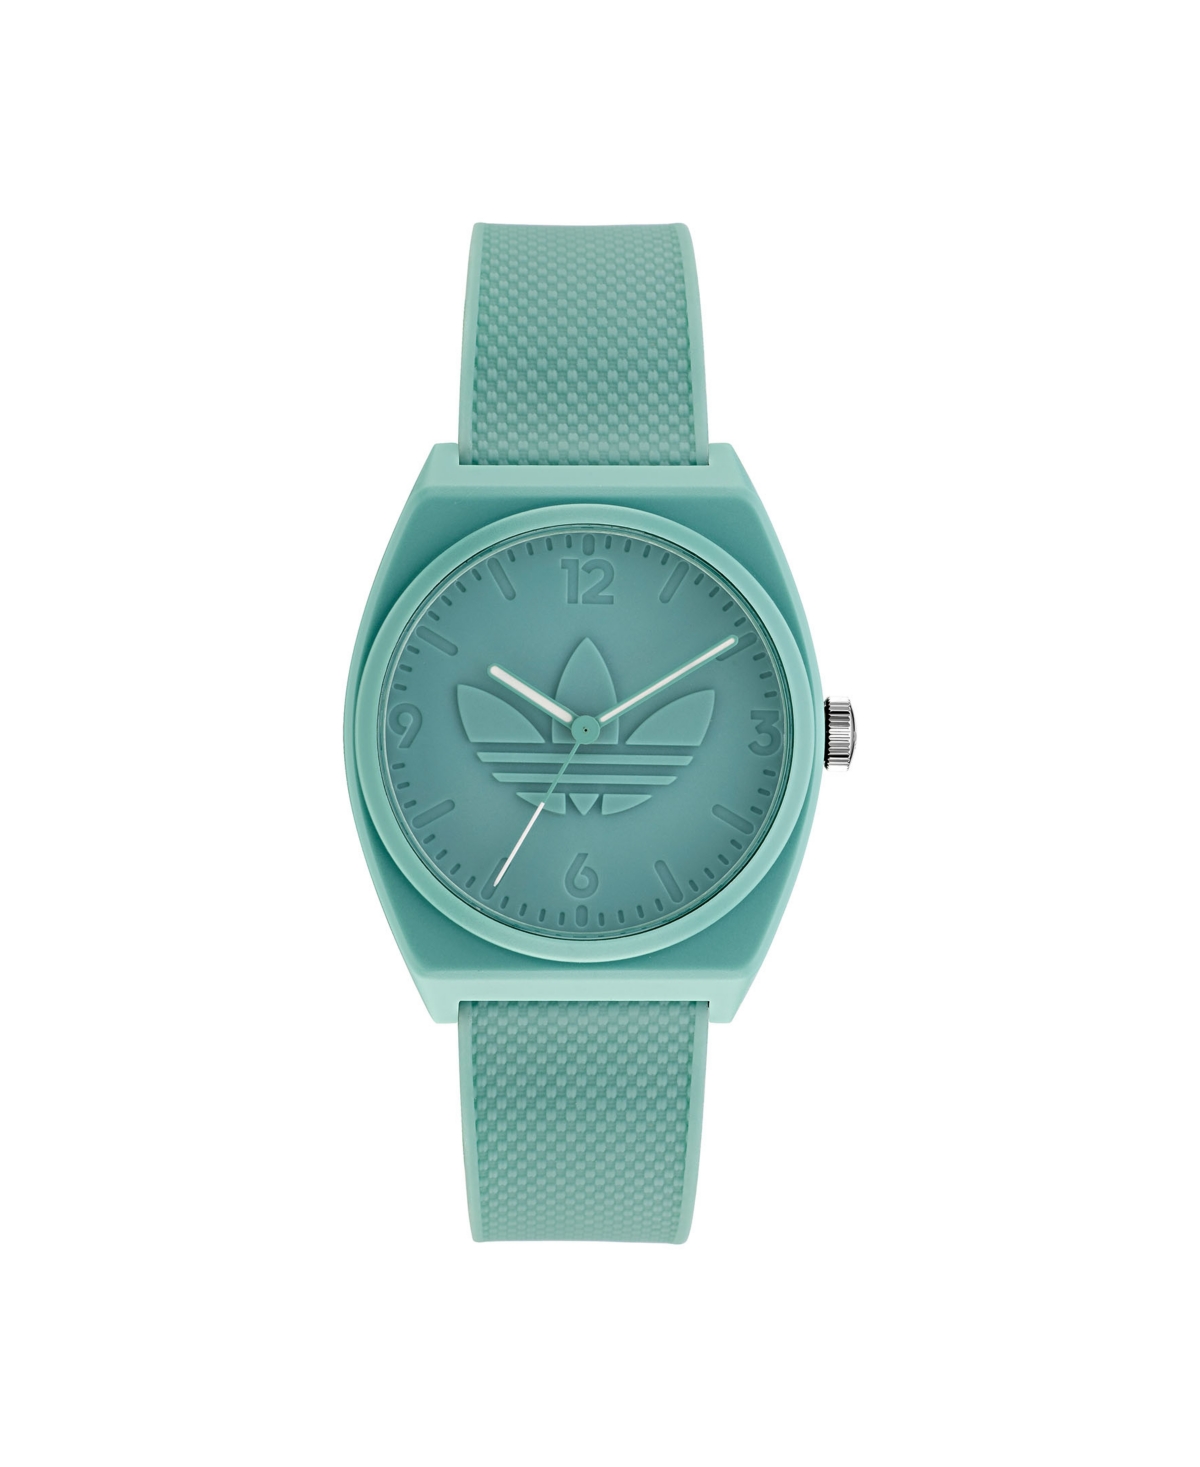 Unisex Three Hand Project Two Green Resin Strap Watch 38mm - Green